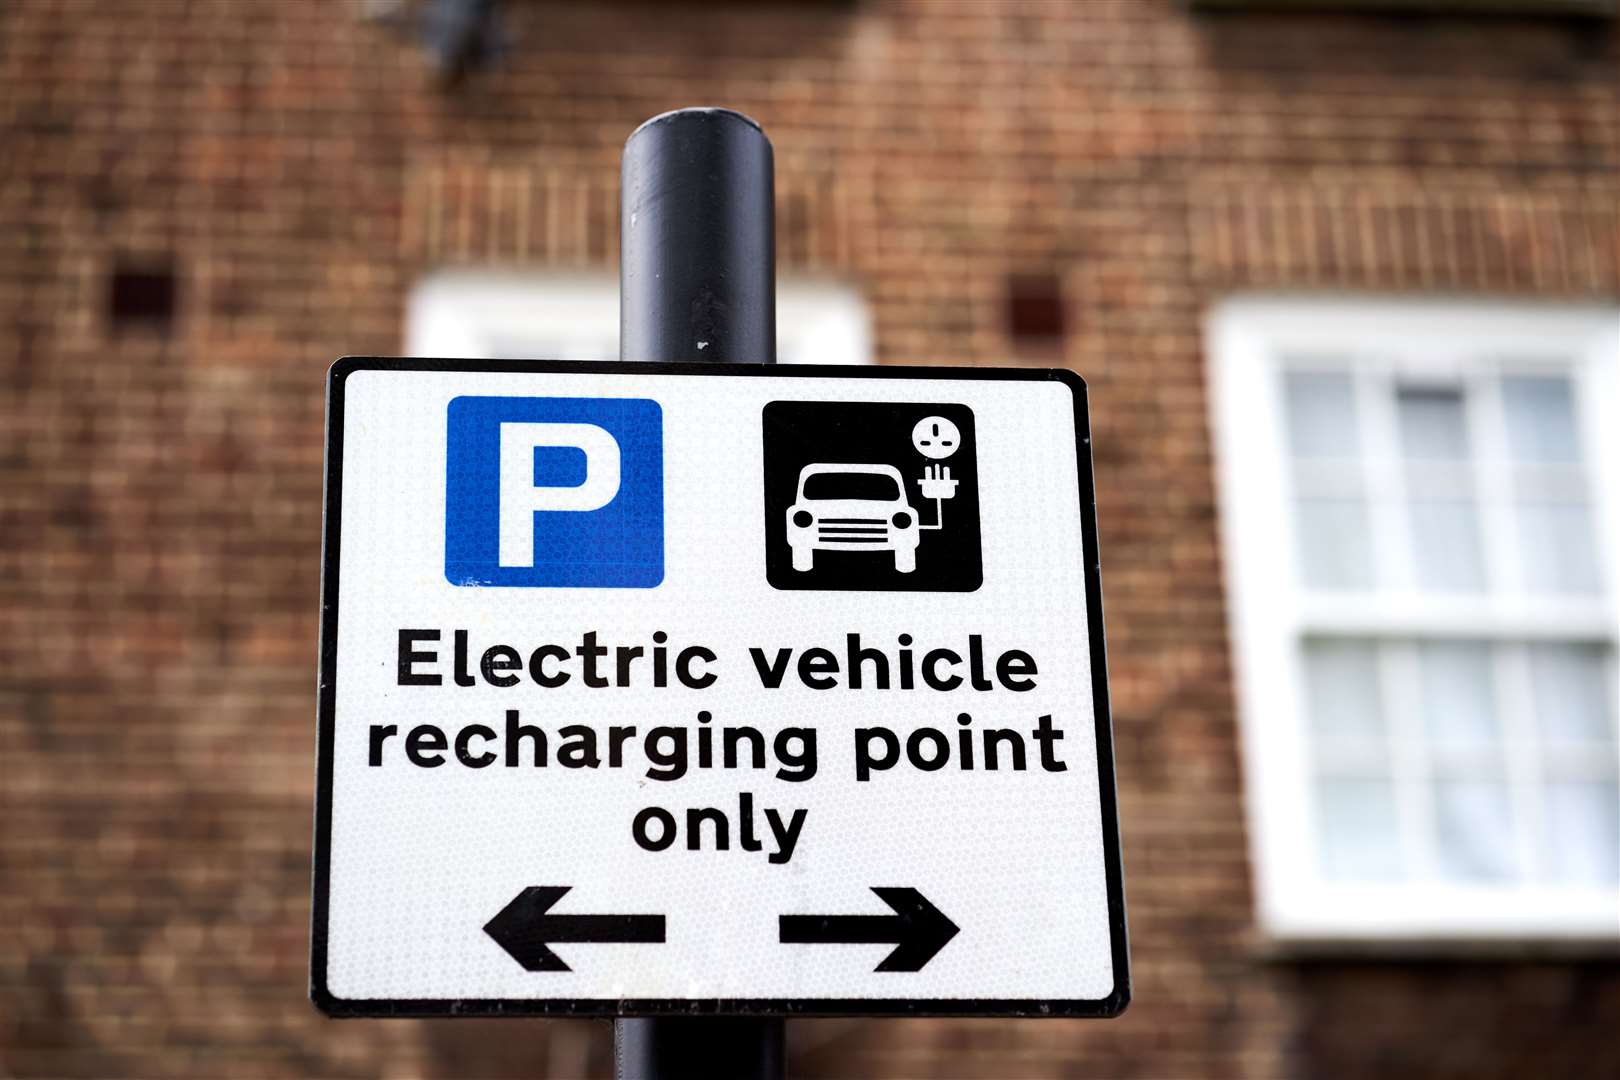 Ed Miliband said charging points for electric vehicles needed to become more widely available (John Walton/PA)